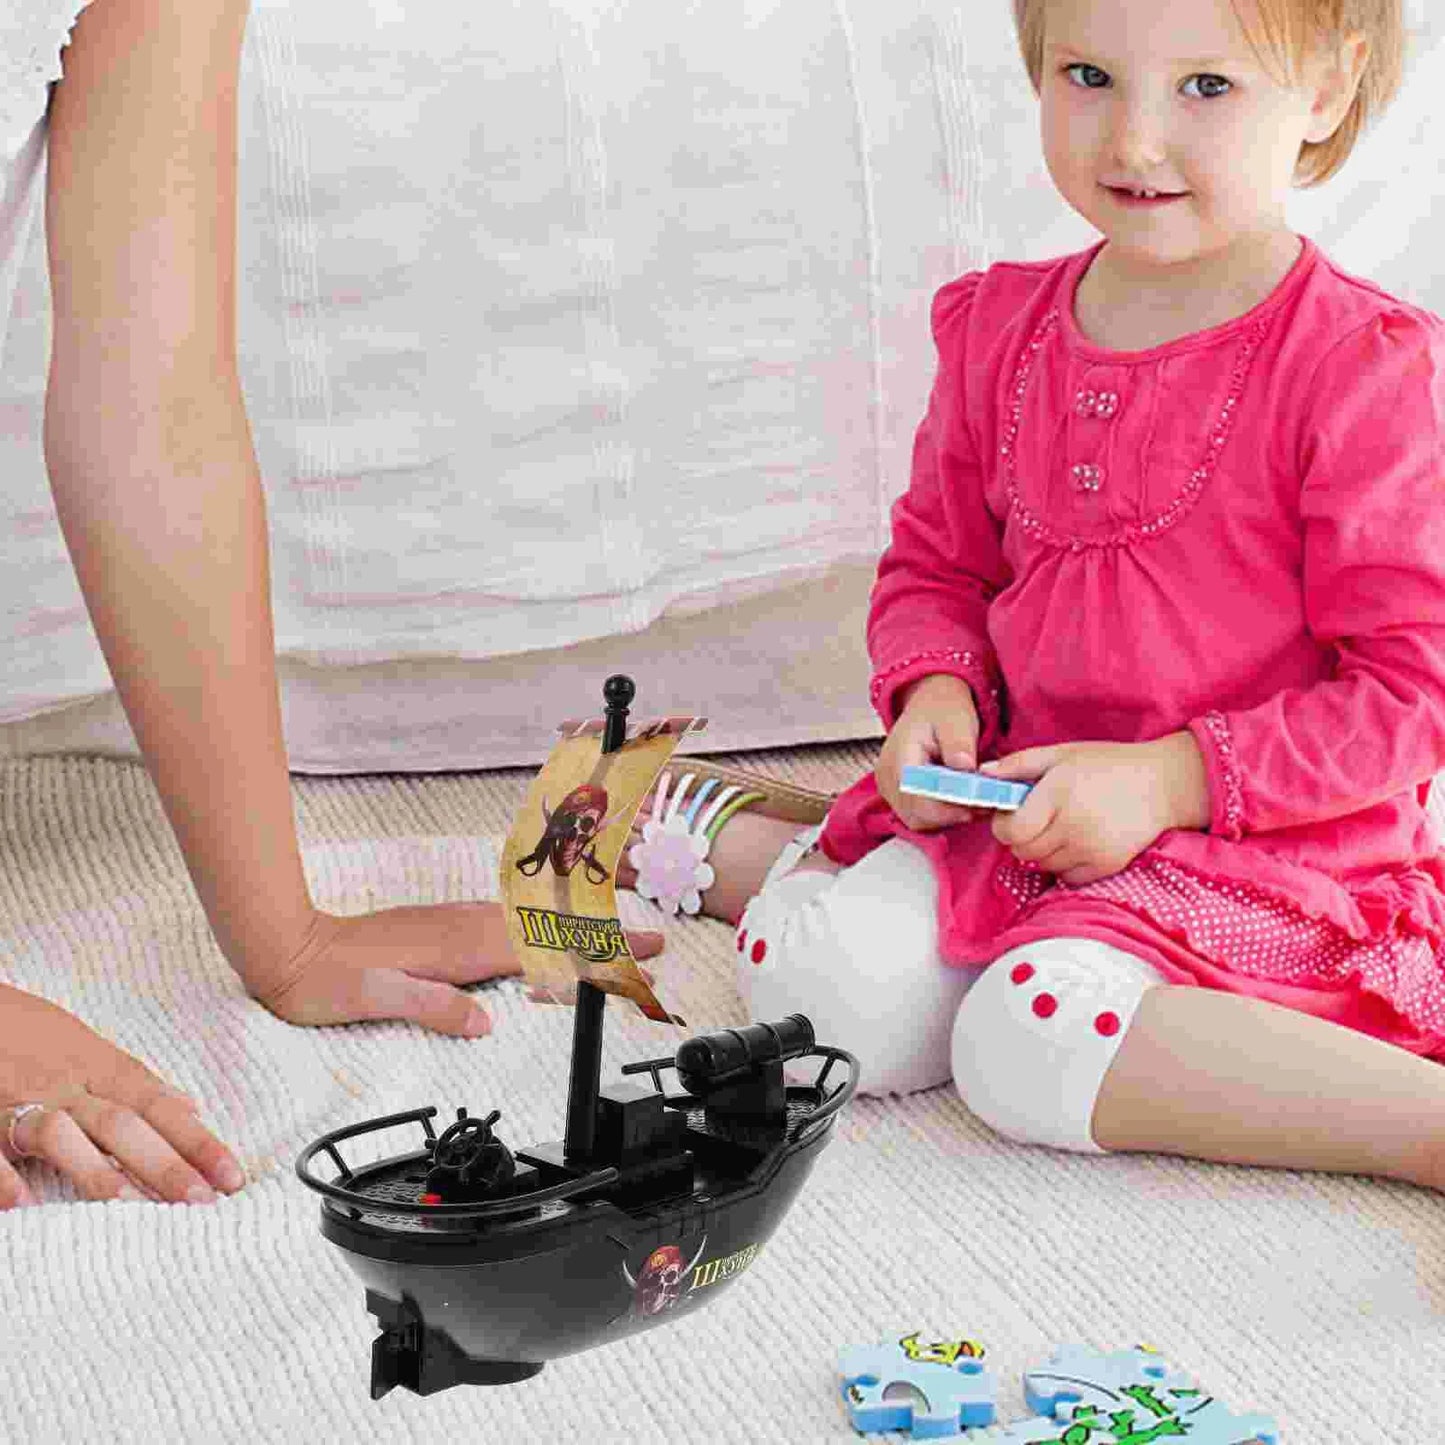 Pirate Ship Bath Toy for Toddlers and Kids with RC Carrier - ToylandEU